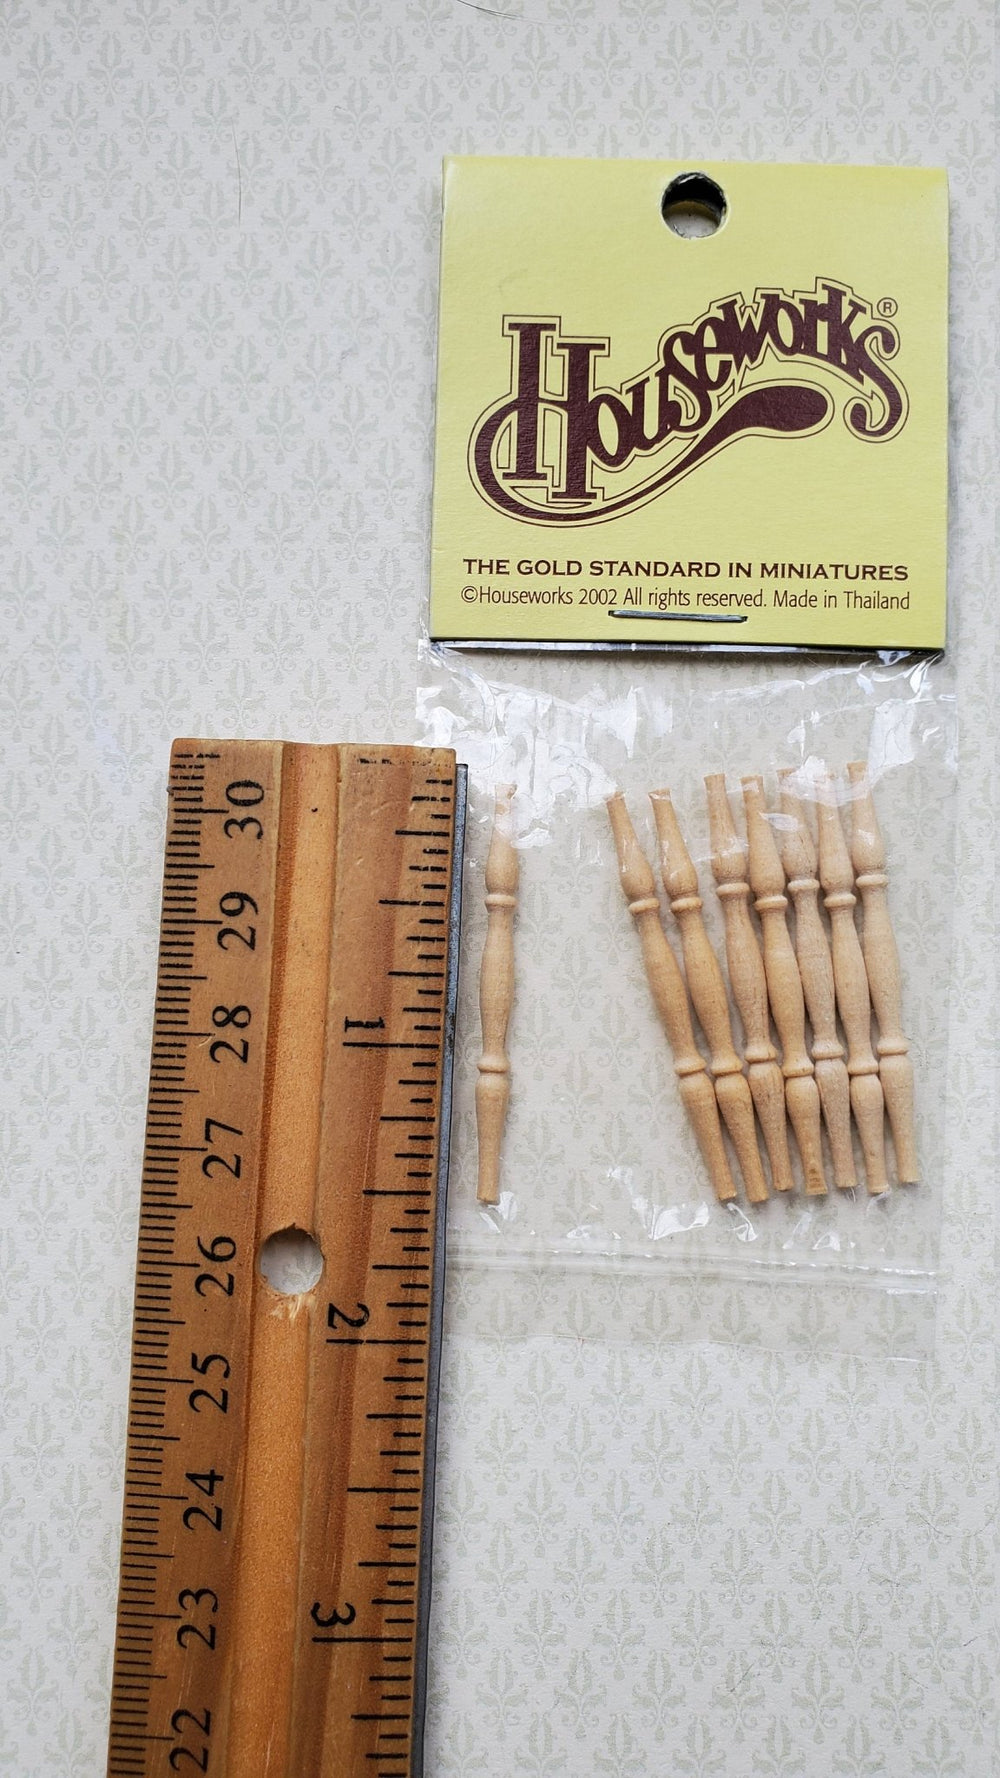 Pixie Dust Miniatures: 1:24 Scale (Half Inch Scale) Old Dripping